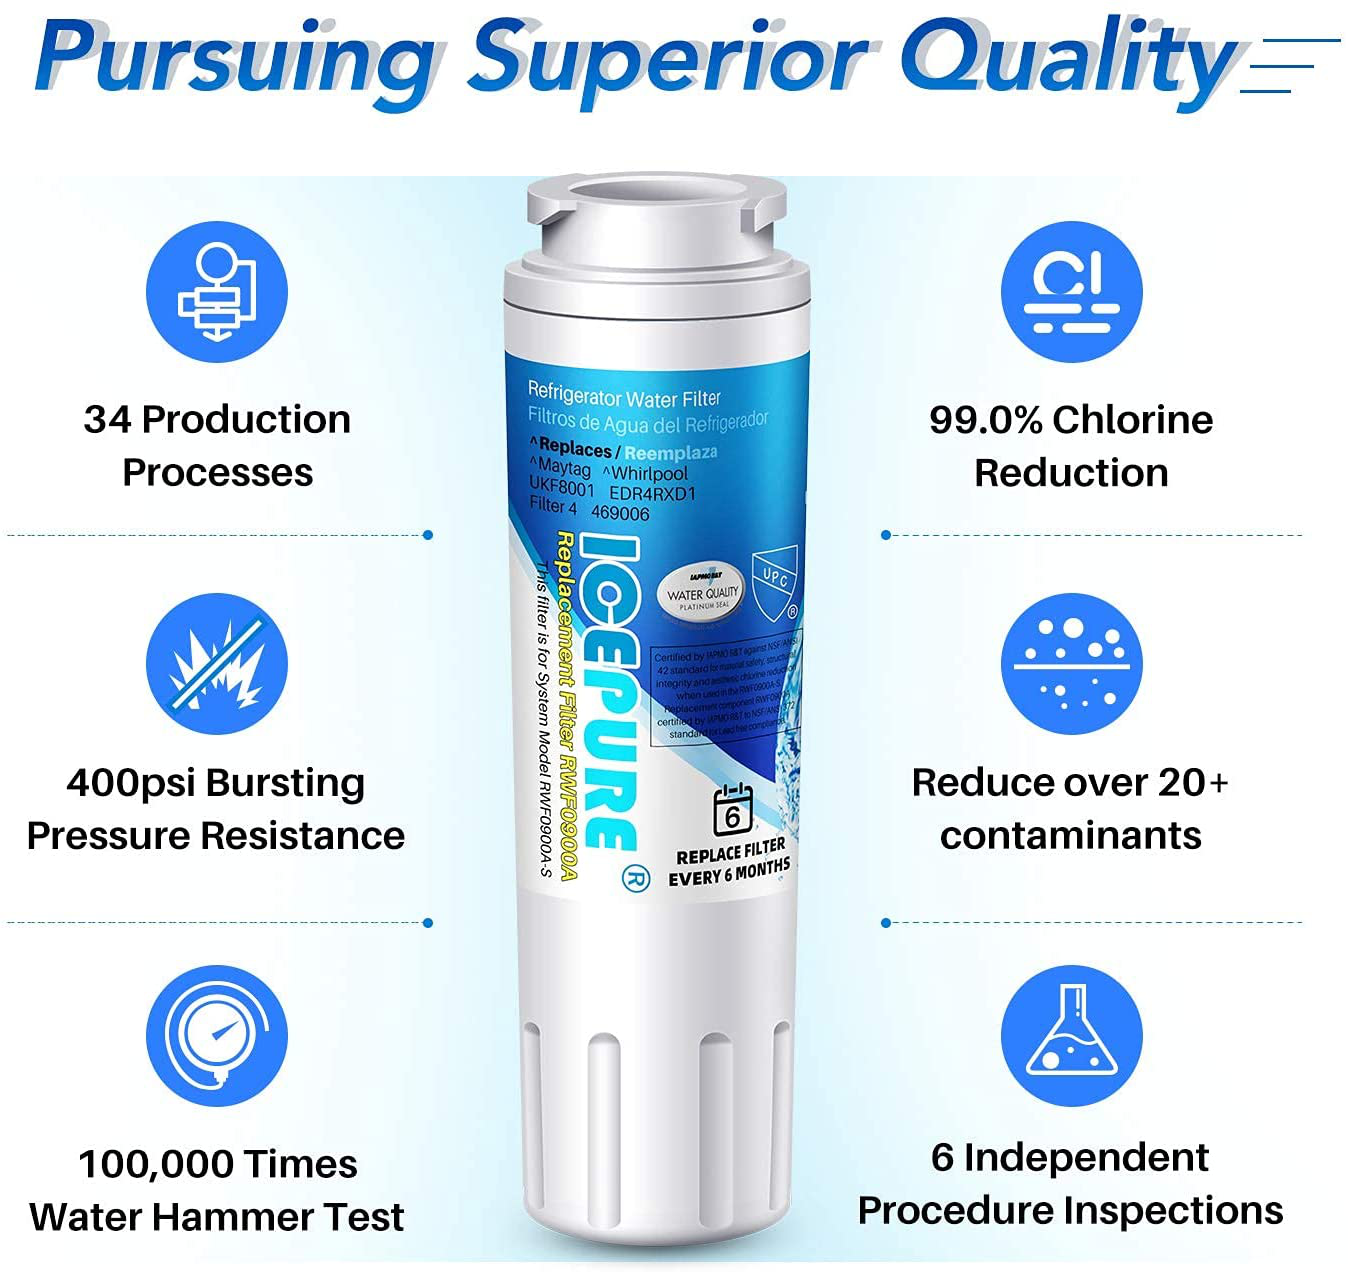 ICEPURE UKF8001 Refrigerator Water Filter Replacement for EveryDrop EDR4RXD1, Whirlpool Filter 4, Maytag UKF8001AXX-200, UKF8001P, 4396395, 469006, Puriclean II, FMM-2, WF295, RFC0900A, RWF0900A 4PACK